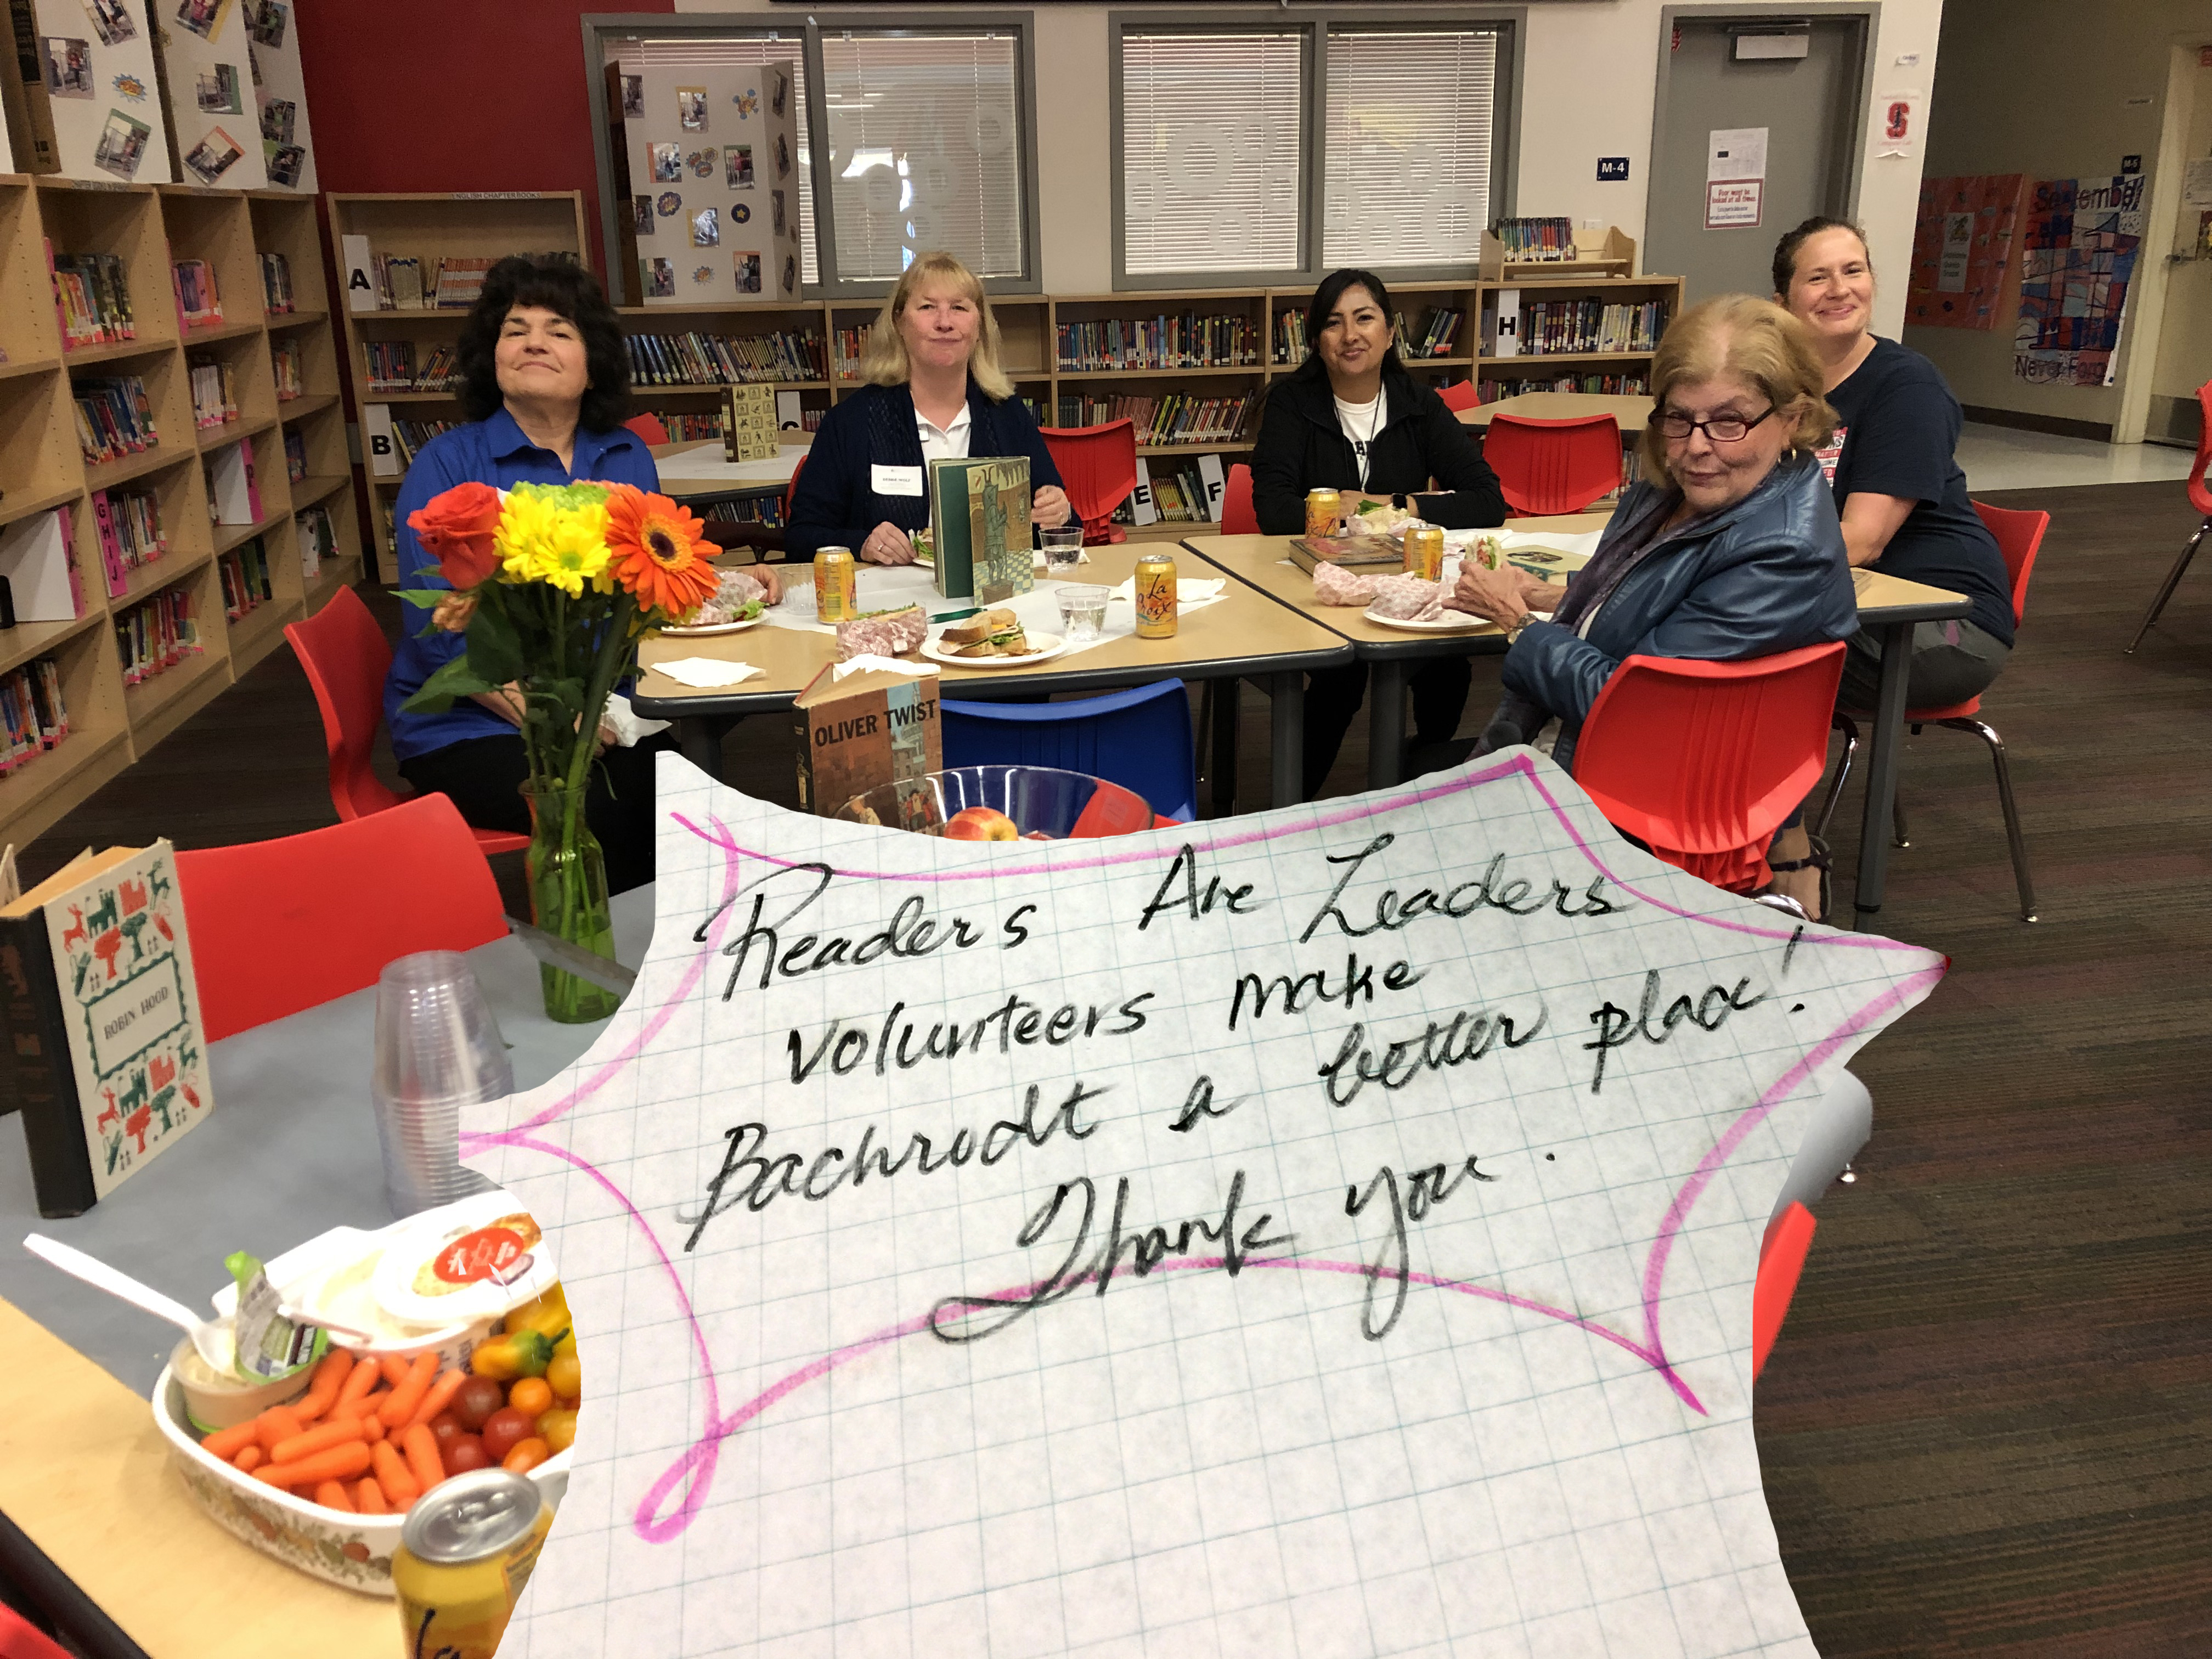 Thank You lunch for Readers Are Leaders at Bachrodt Elementary